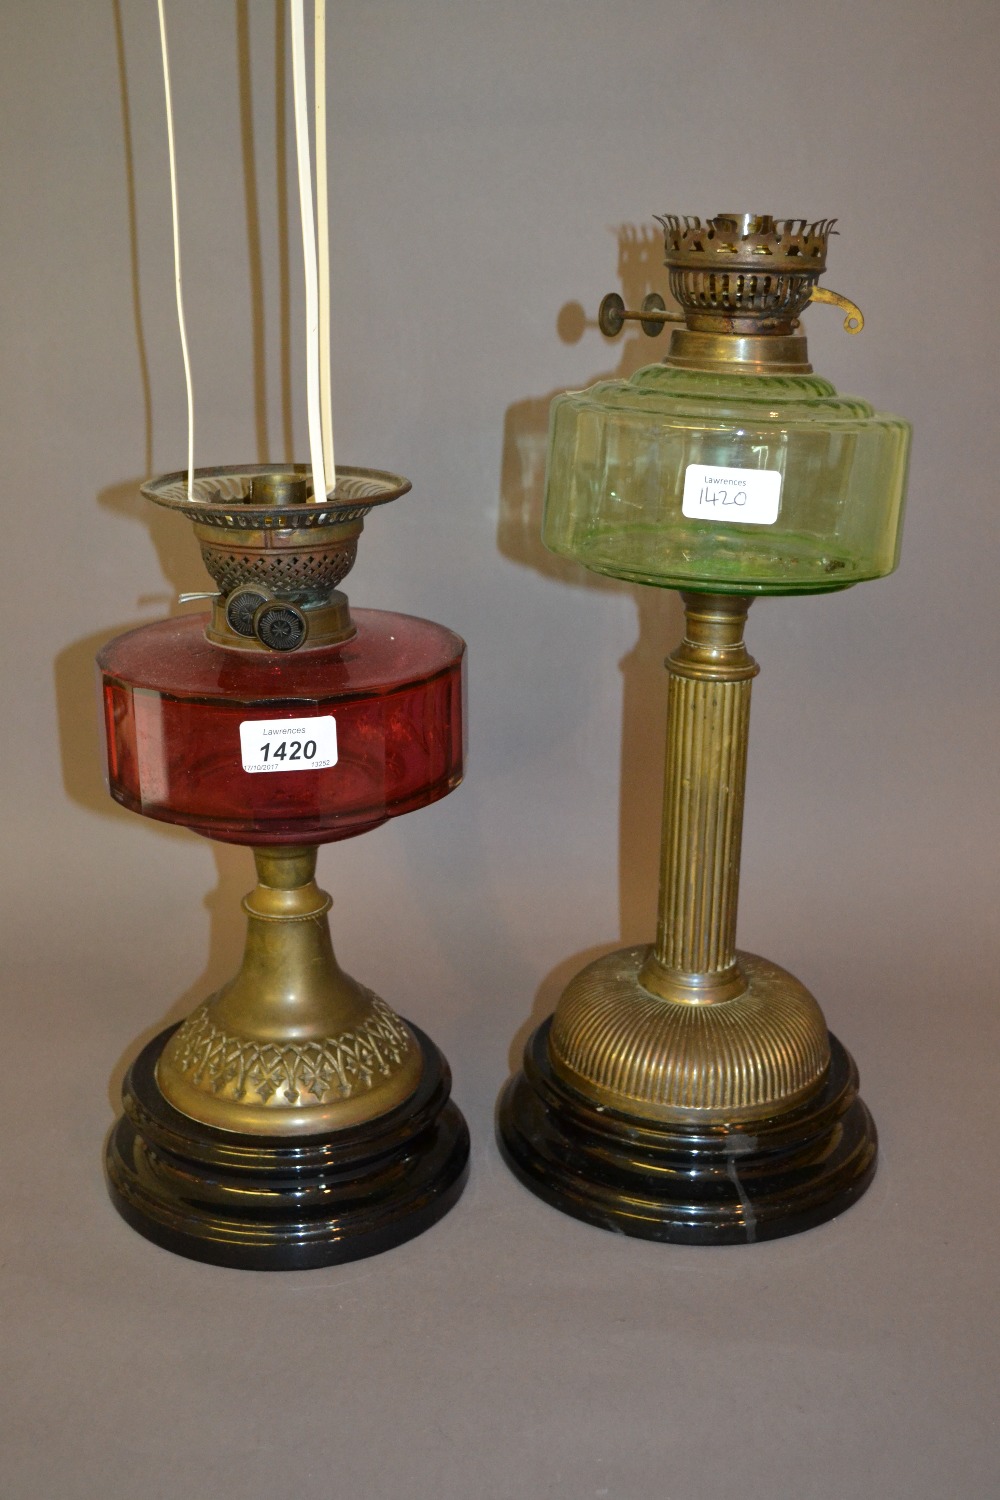 Cranberry glass and brass oil lamp adapted for use with electricity,